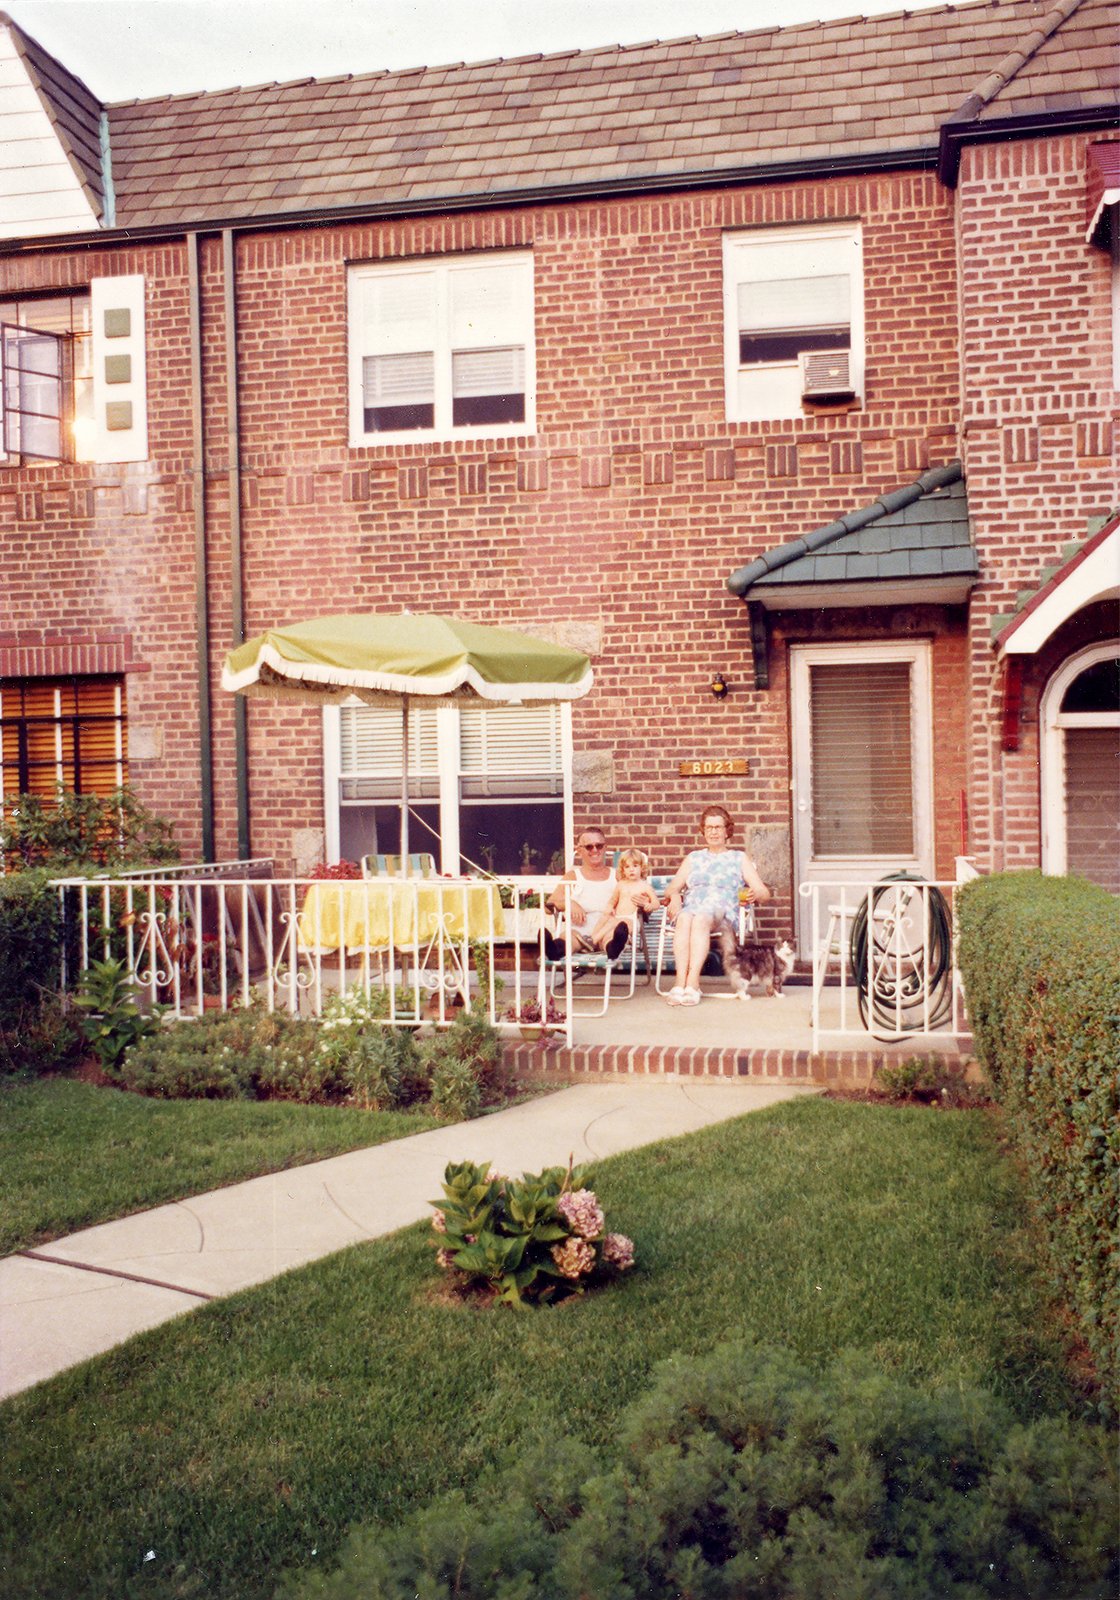 Paddy and Catherine relax on their front patio, Elmhurst, Queens, 1976.